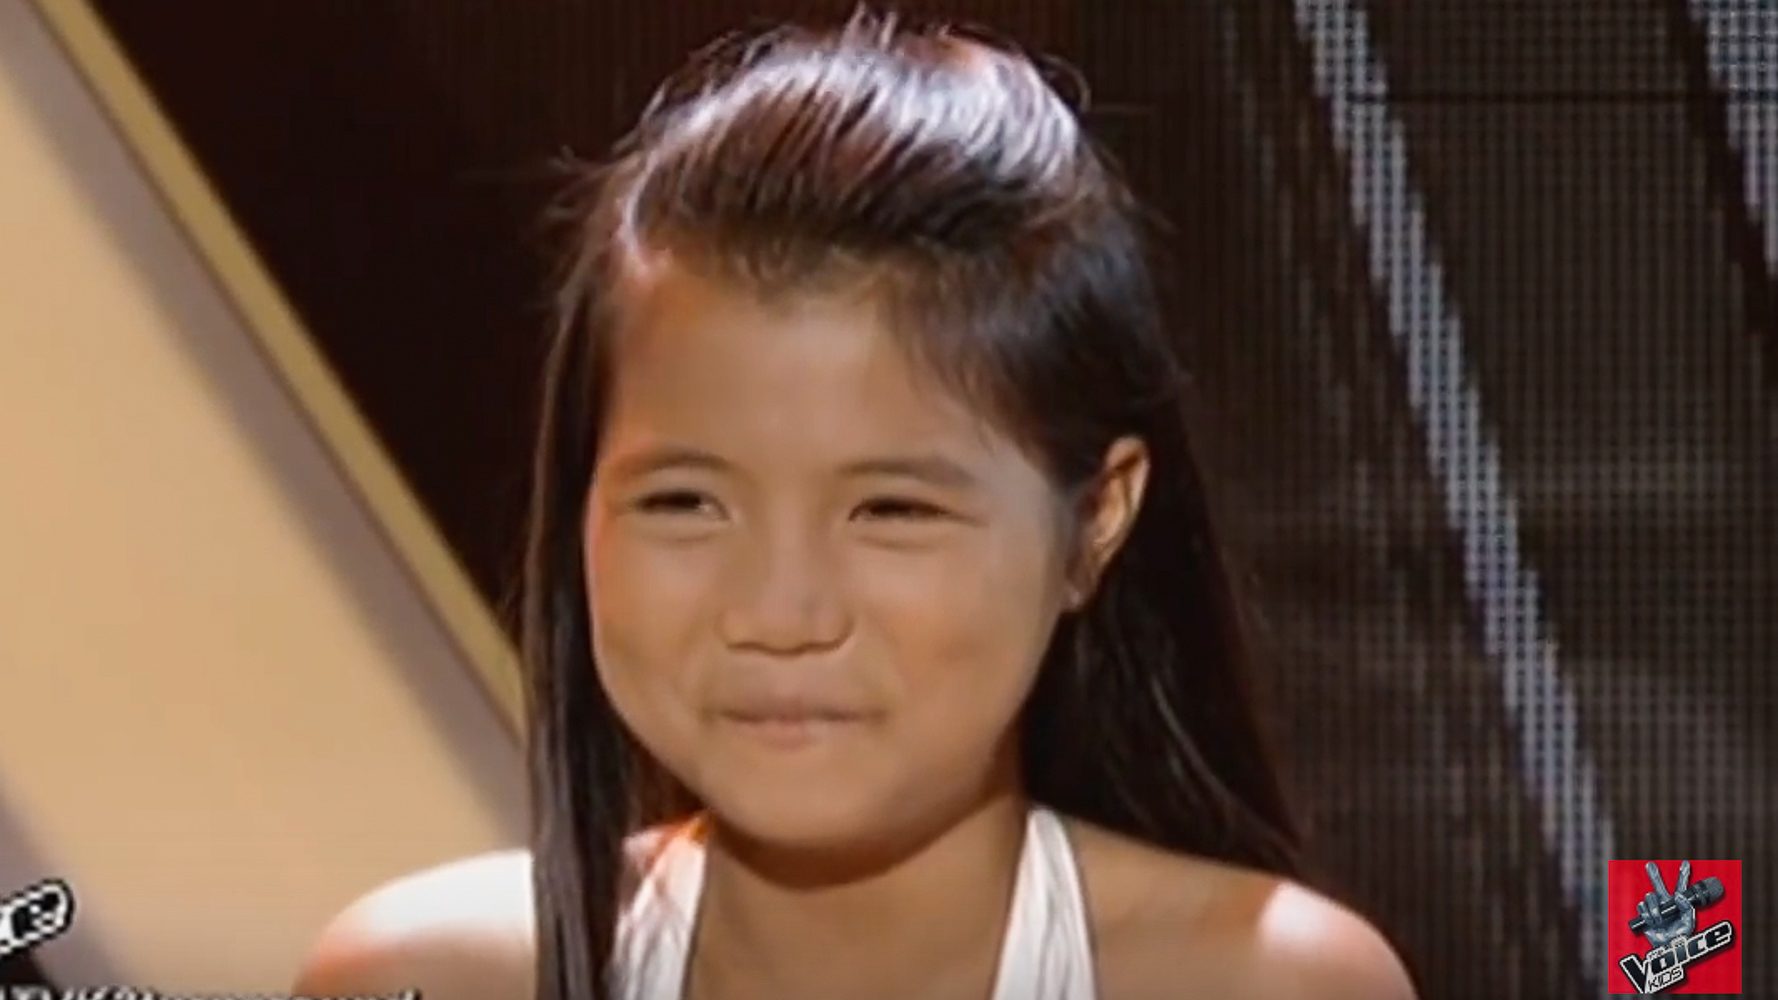 Screengrab from YouTube/The Voice Kids Philippines  